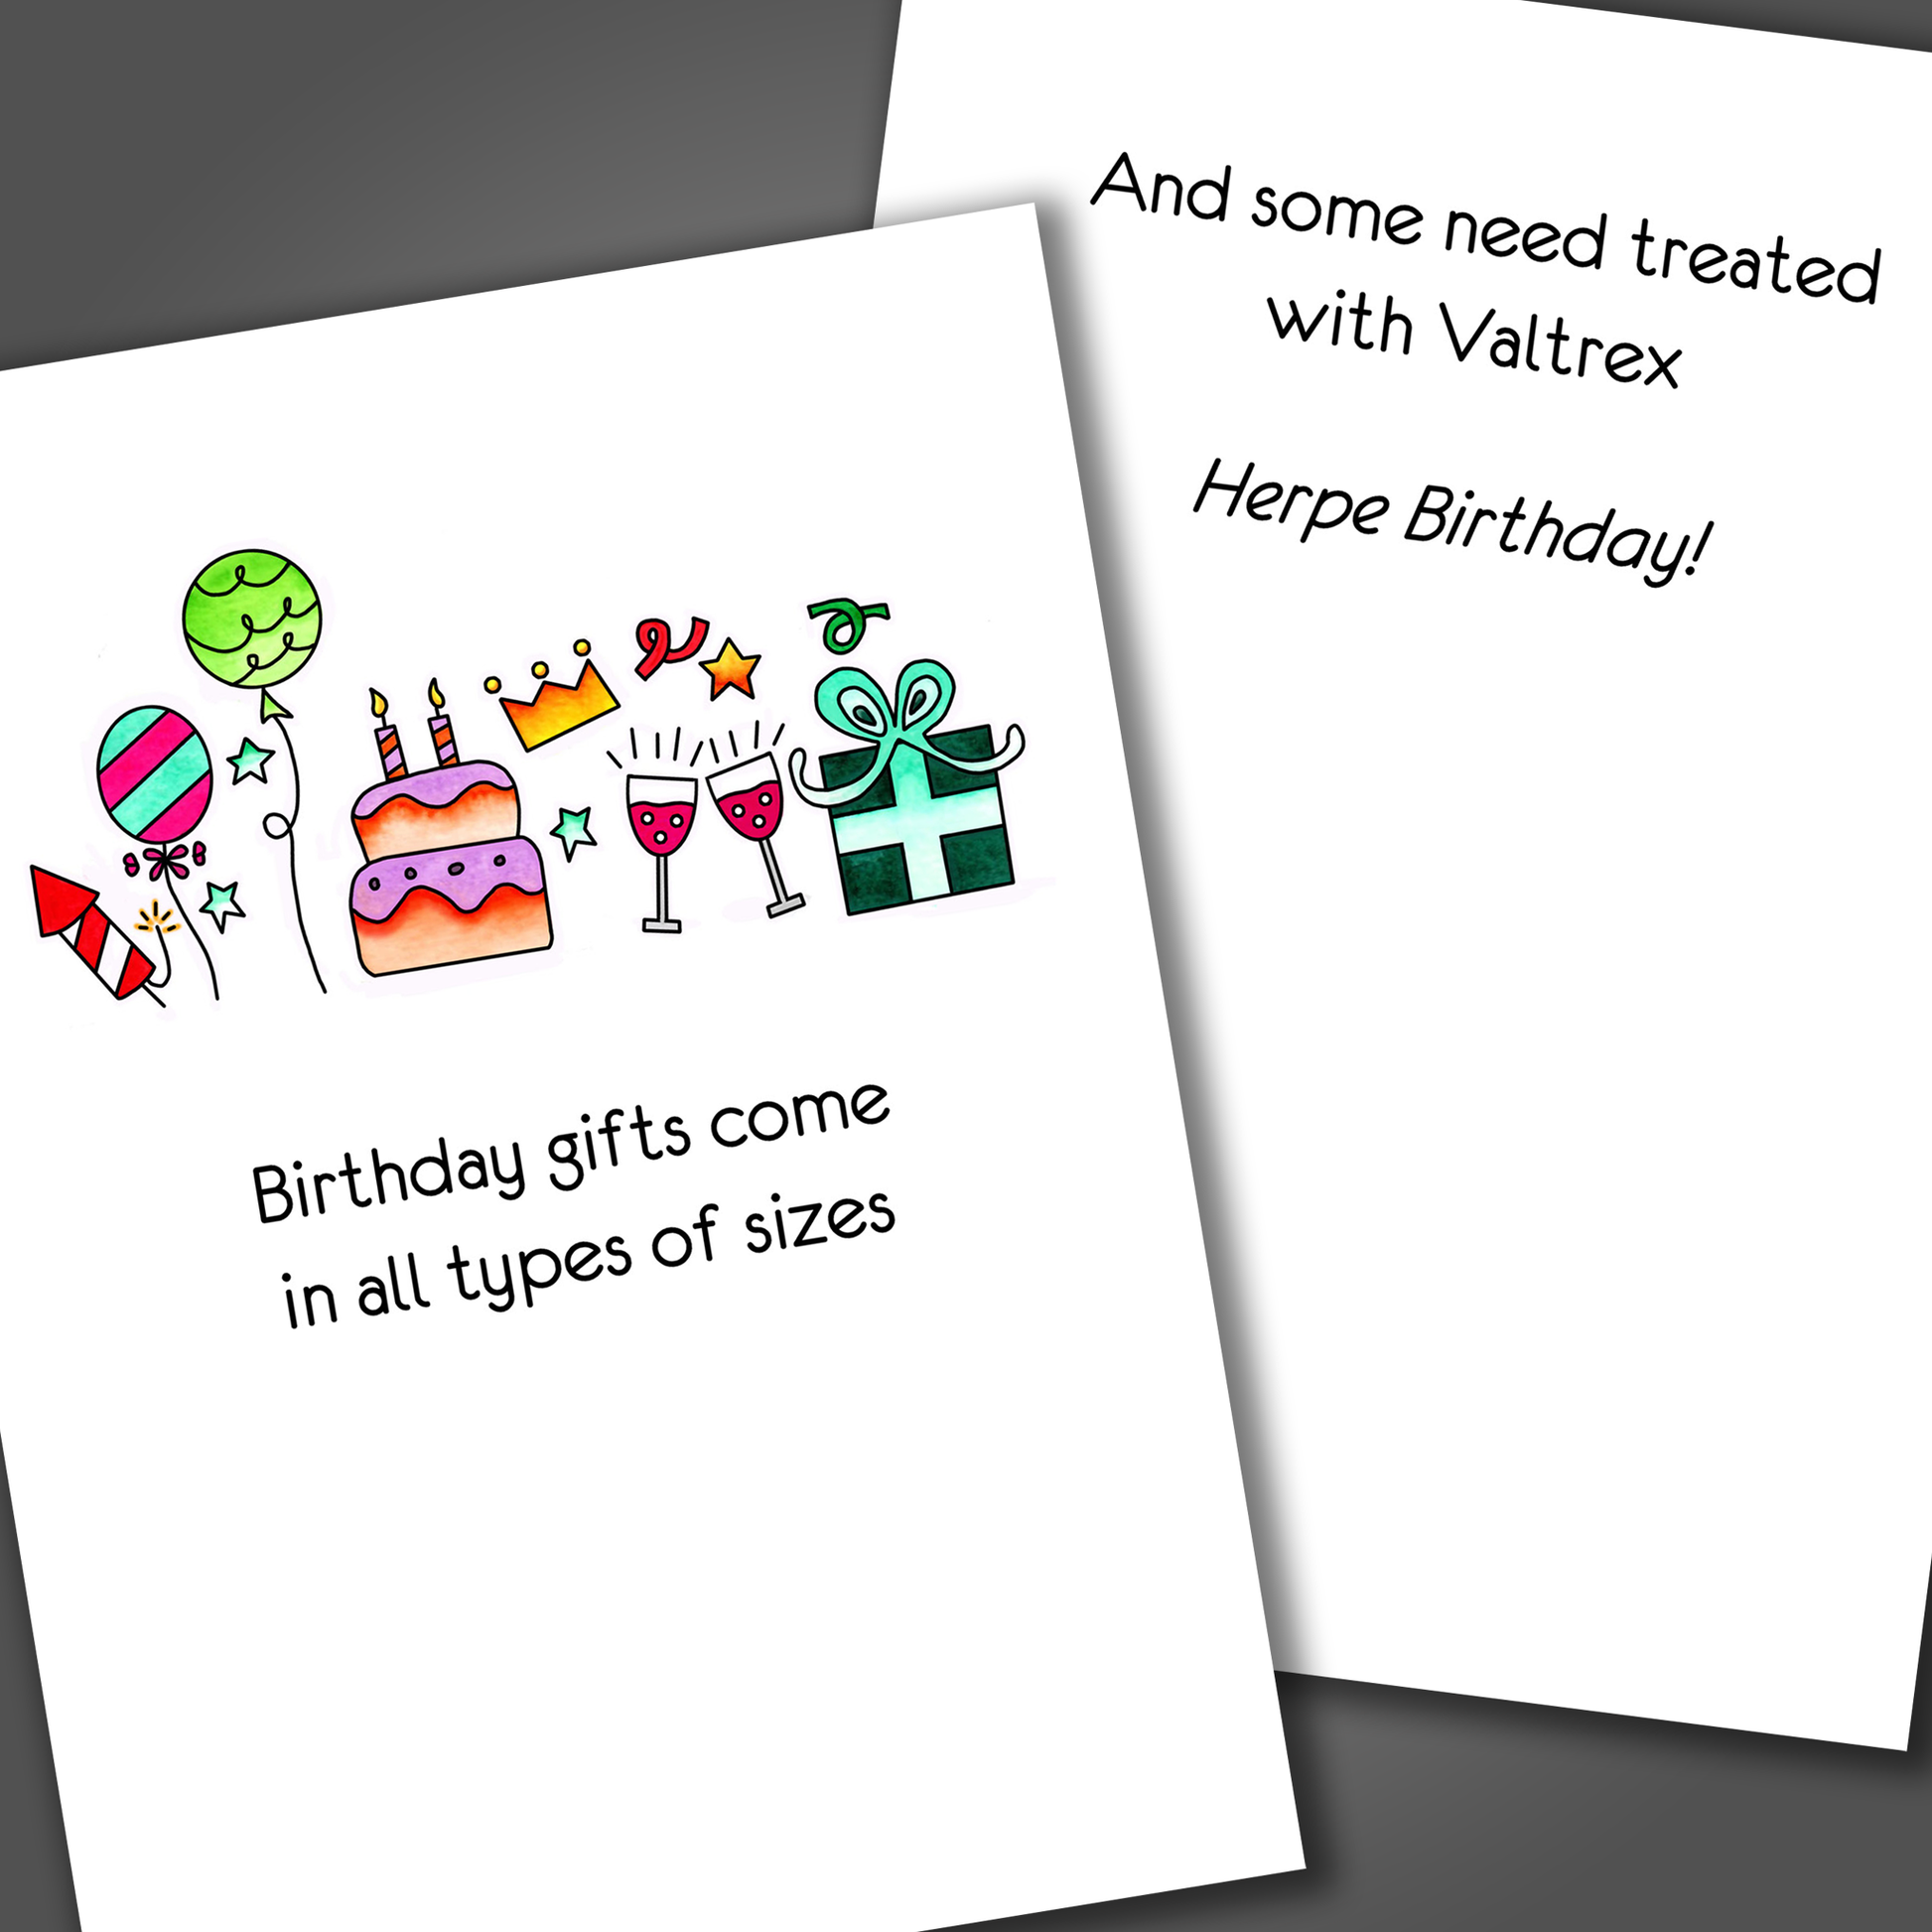 Funny adult birthday card with drawings of cake, balloons and wine glasses drawn on the front of card. Inside of the card is a funny joke that ends in herpe birthday